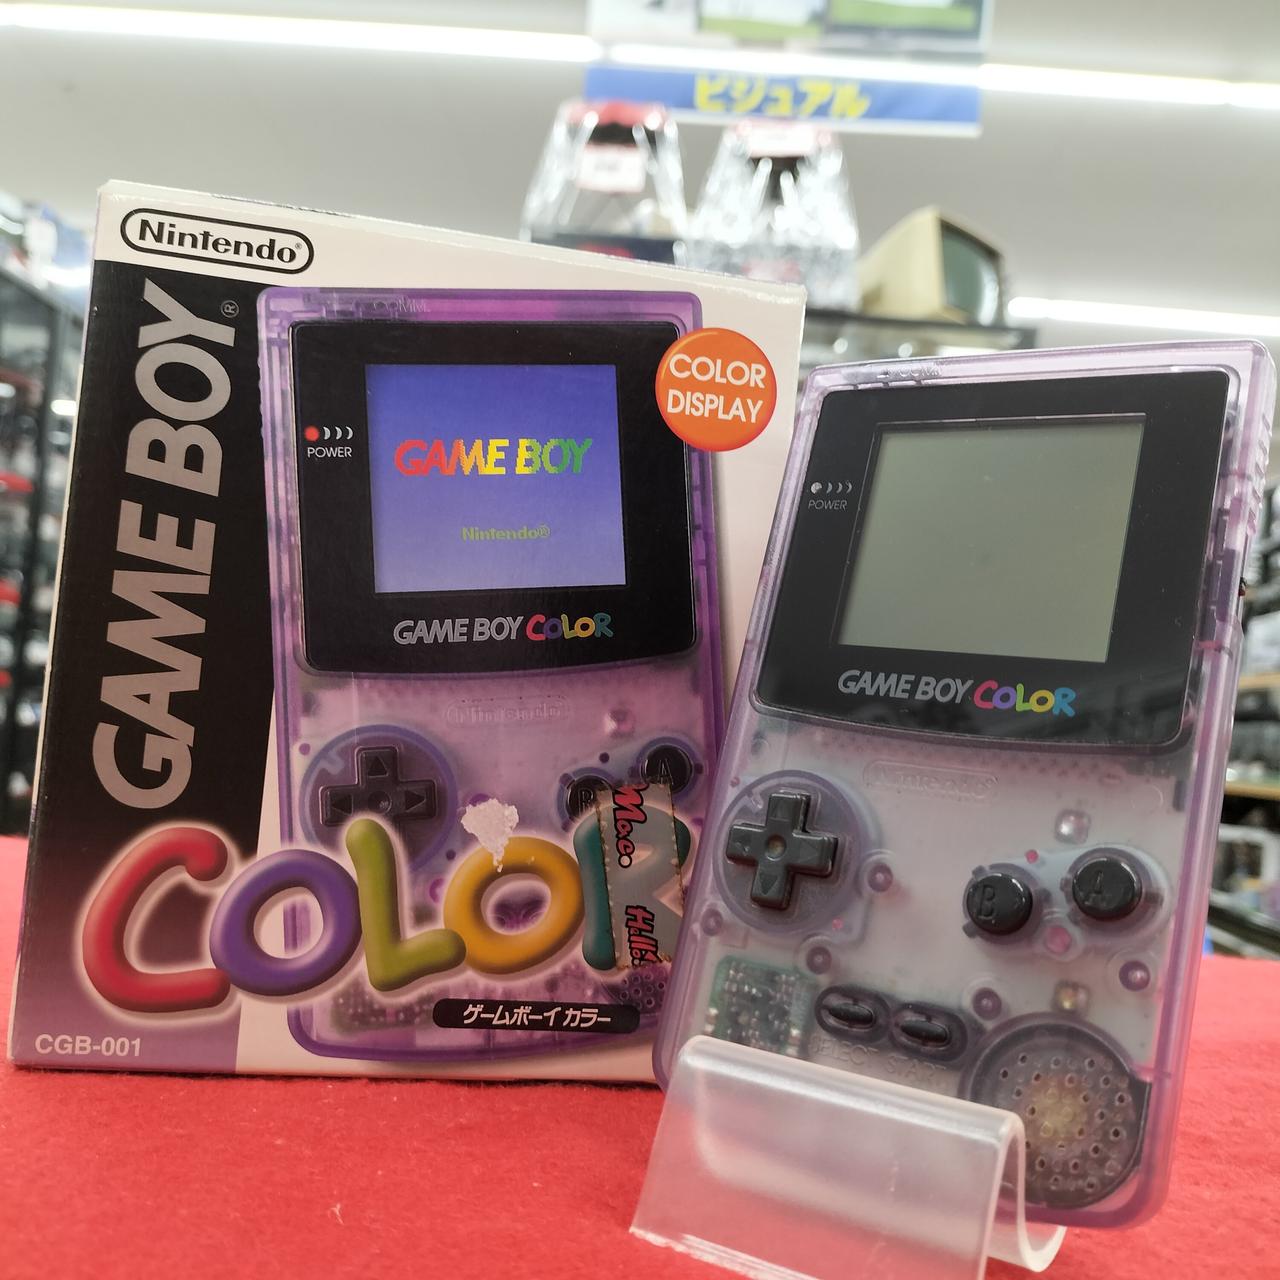 Nintendo Model Number: CGB-001 Console Game Boy Color Used in 